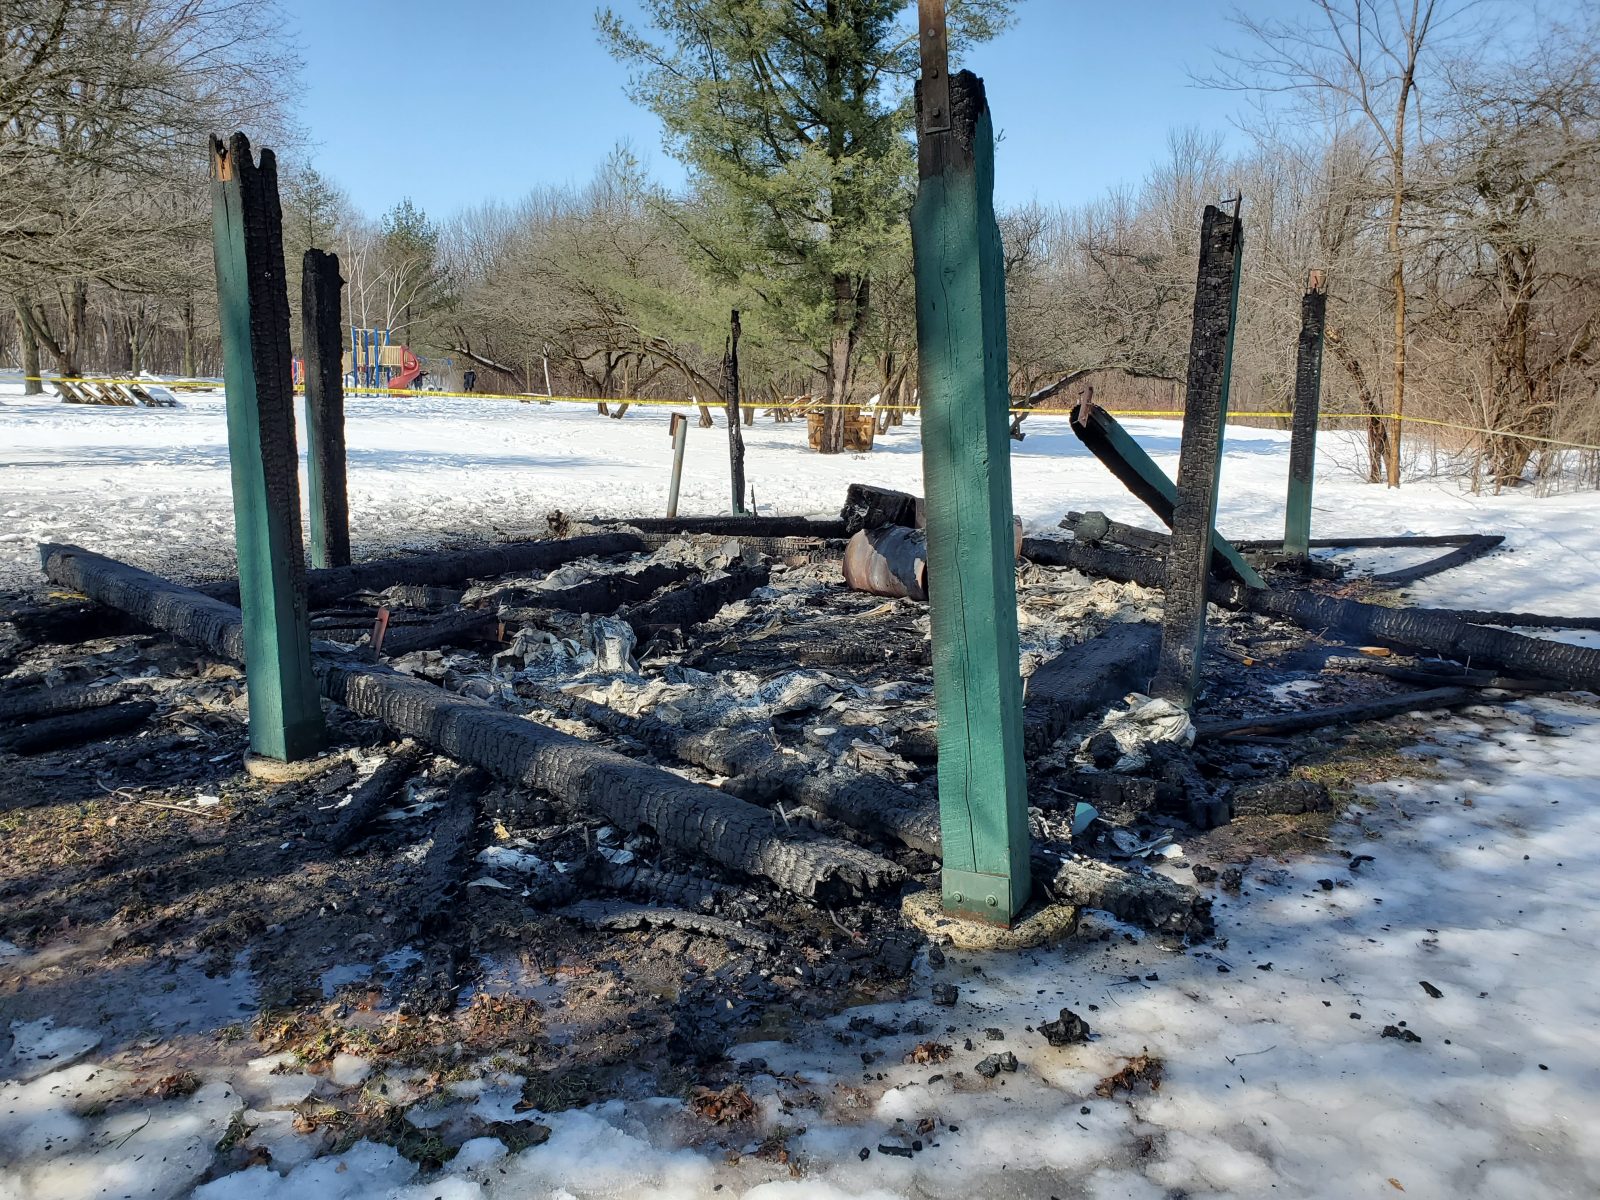 Fire destroys picnic shelter at Gray’s Creek